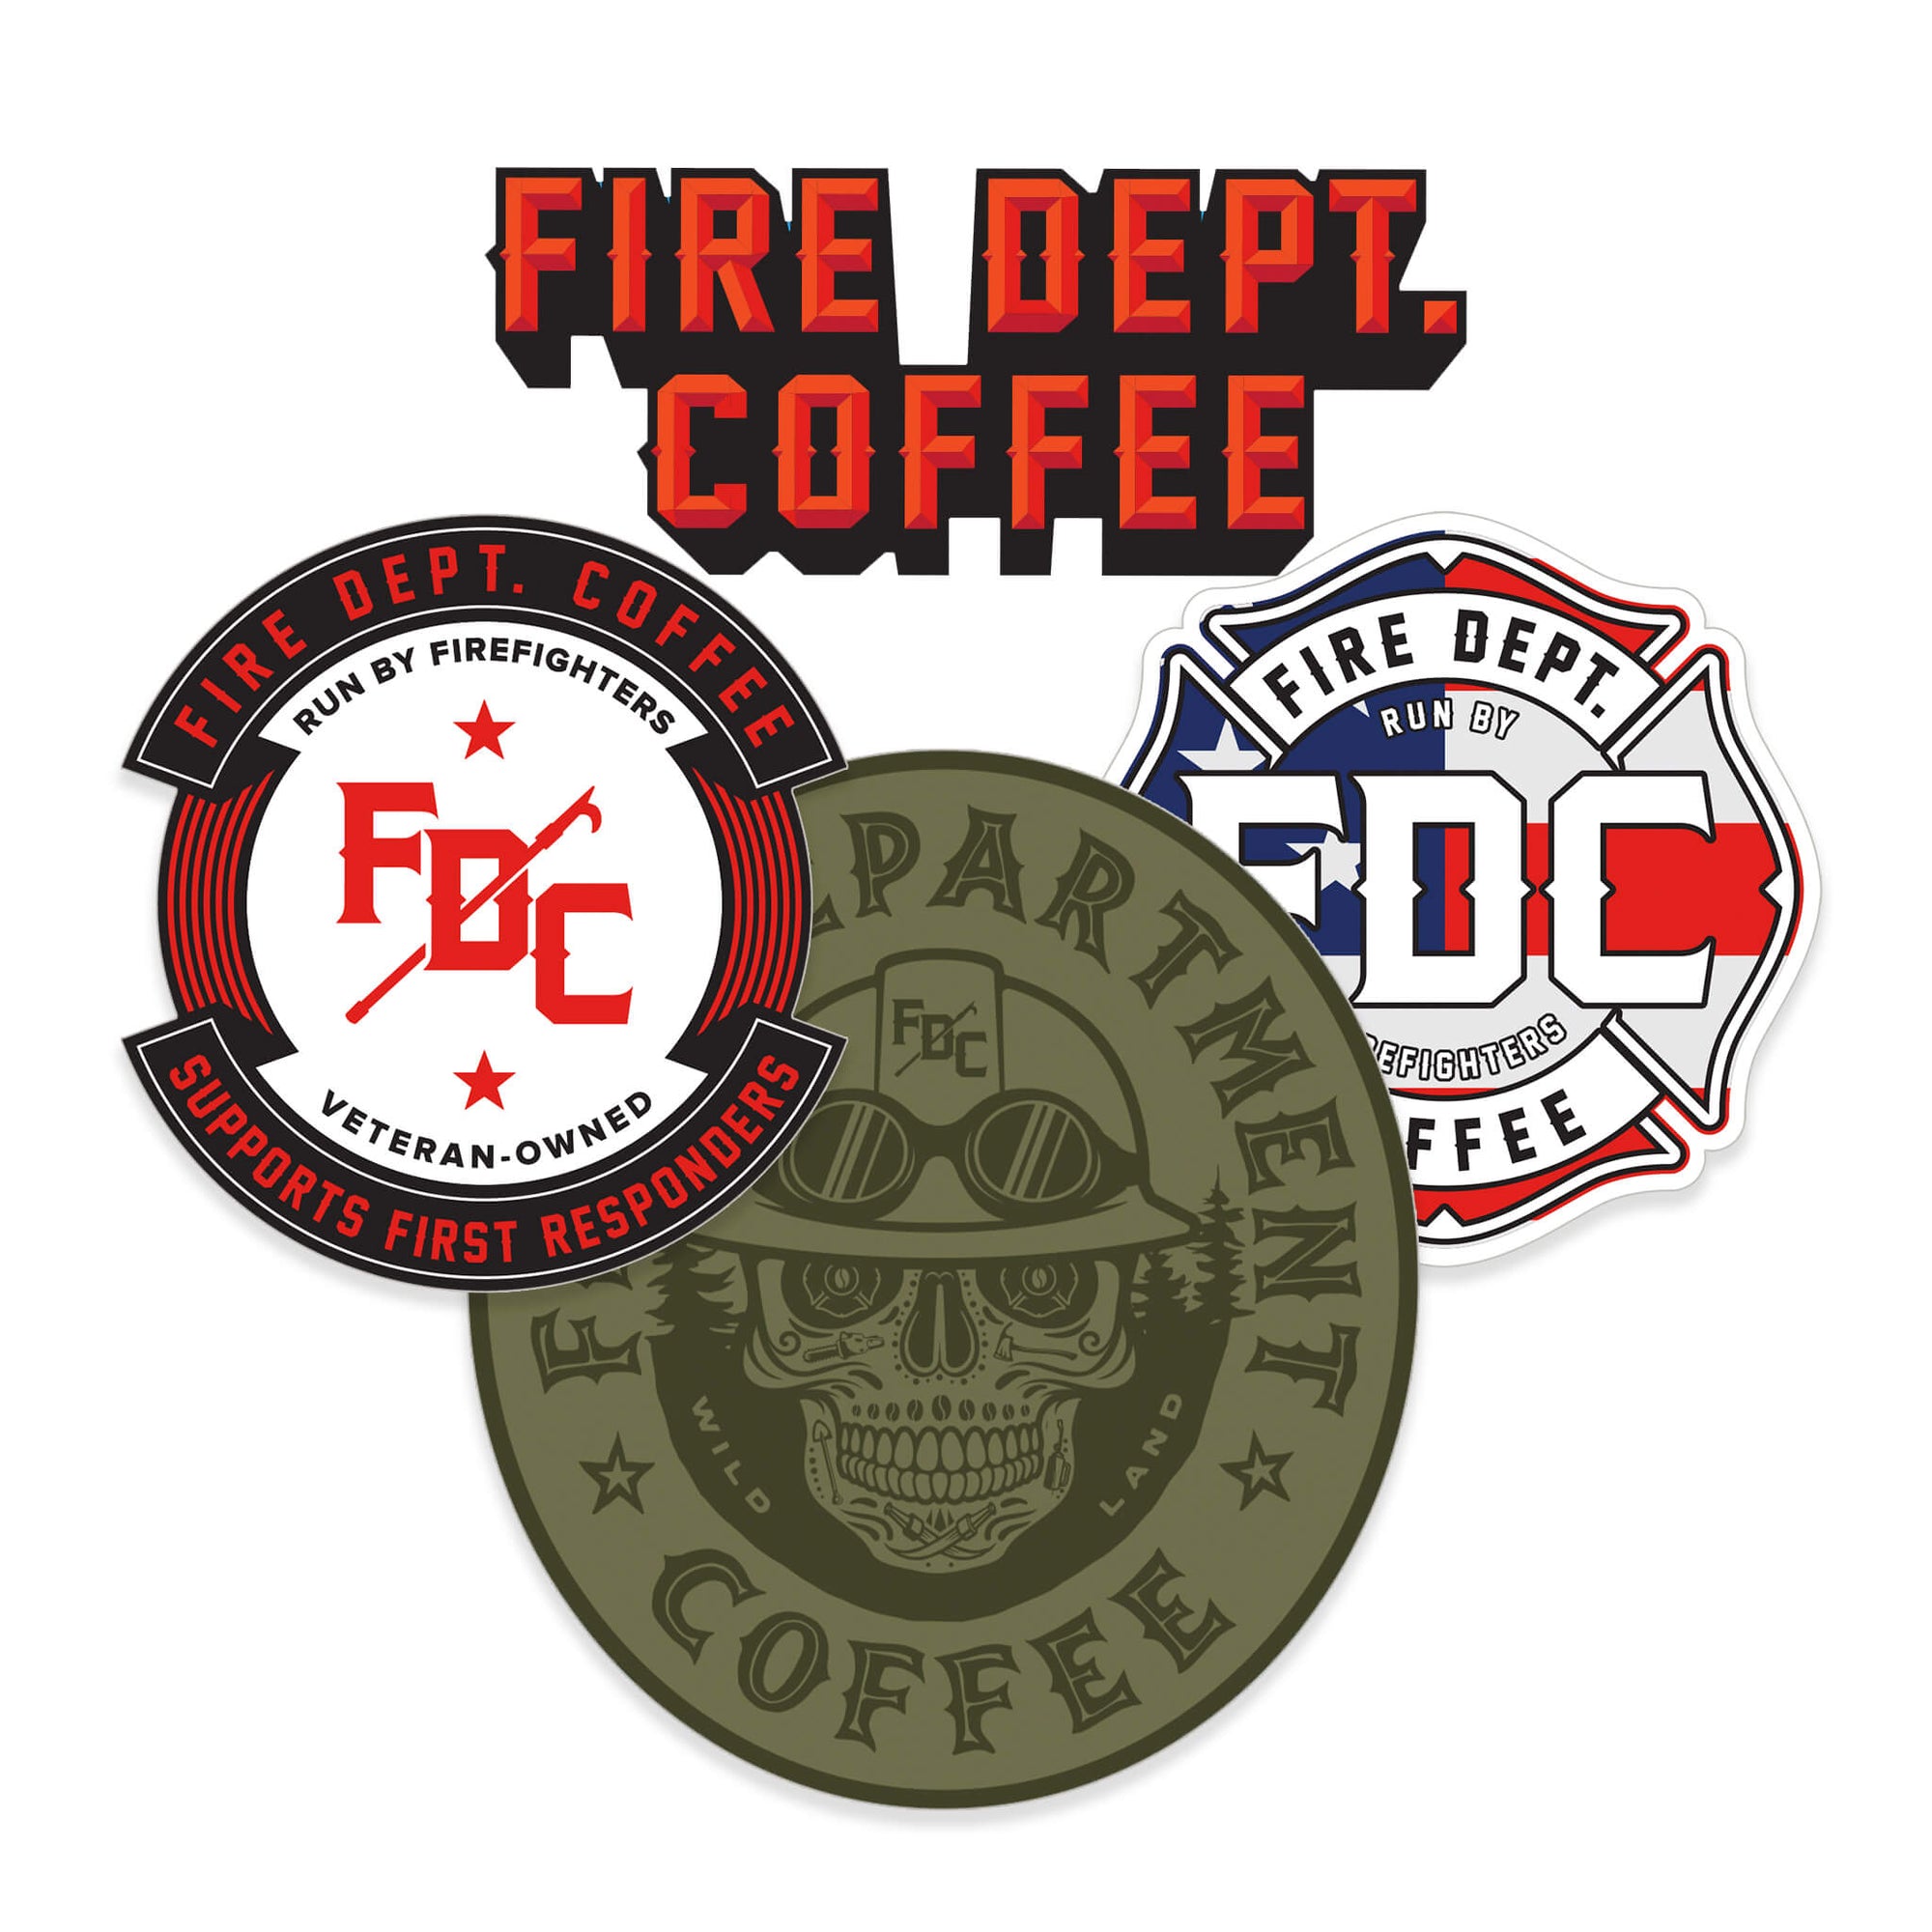 A variety 4 pack of Fire Department Coffee firefighter stickers.